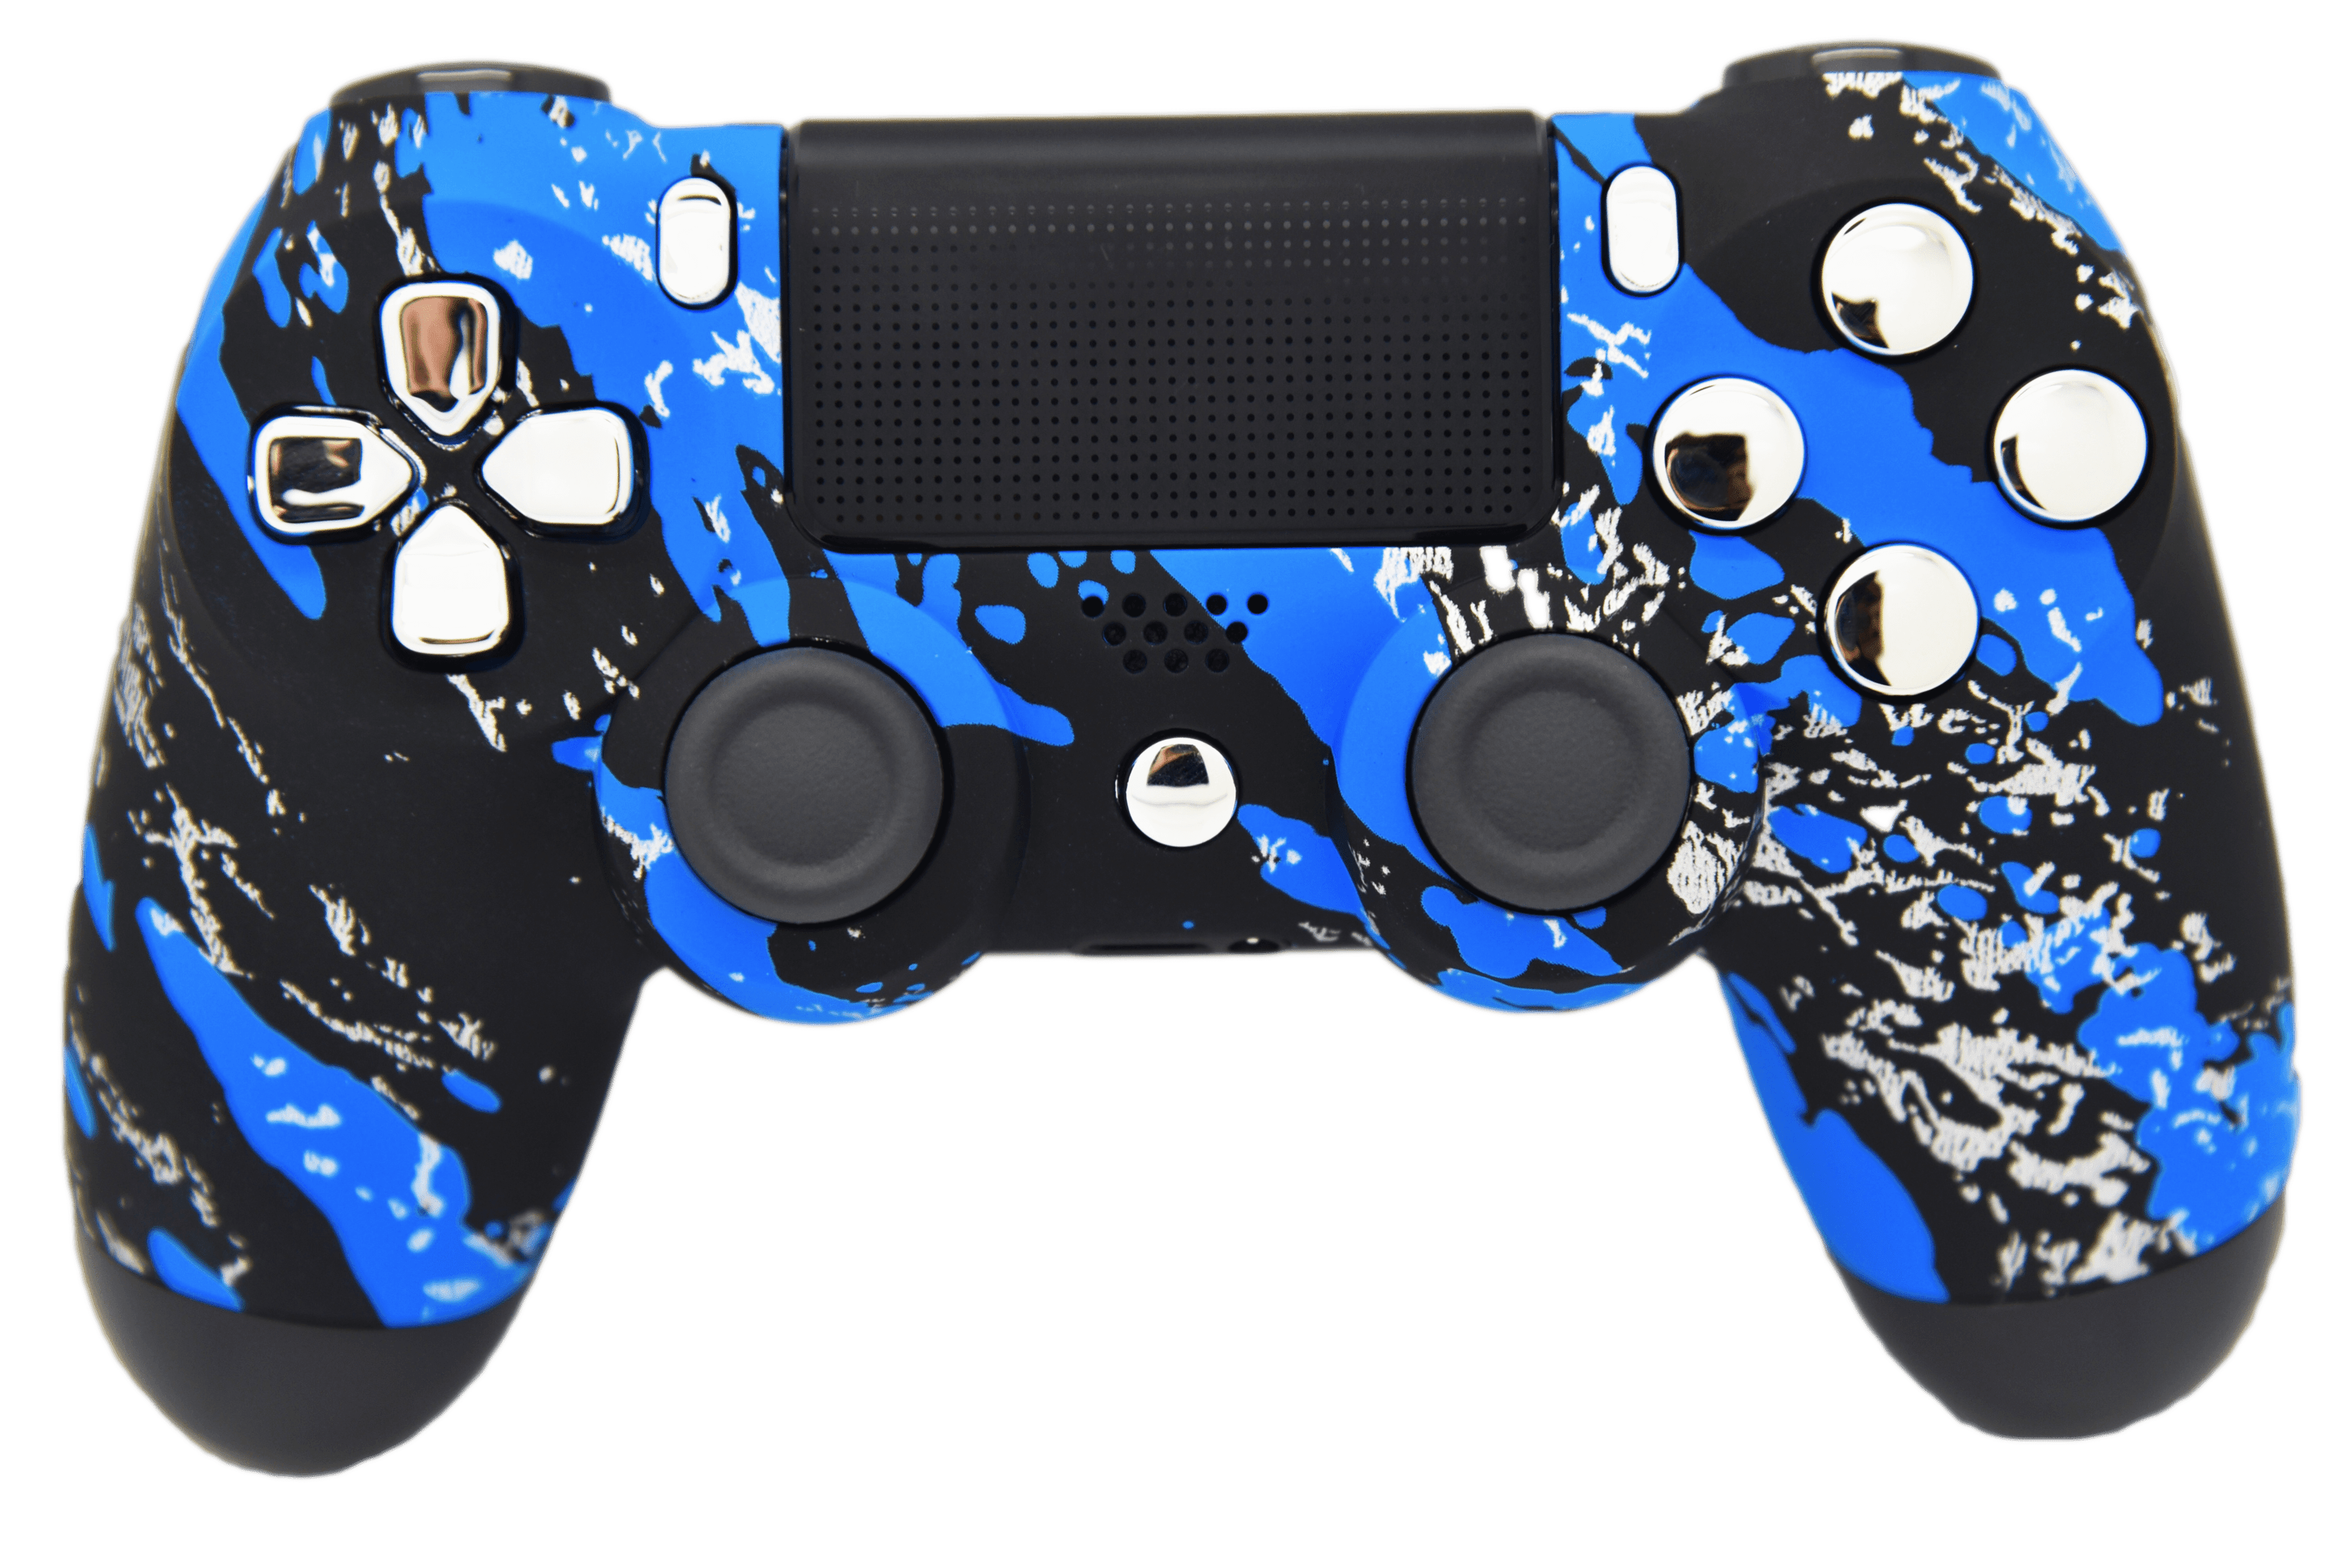 Ps4 джойстик android. Sony PLAYSTATION 4 Controller PNG. Джойстик ps4 Рапид. Dualshock 4 Cod. PLAYSTATION 4 Joystick PNG.